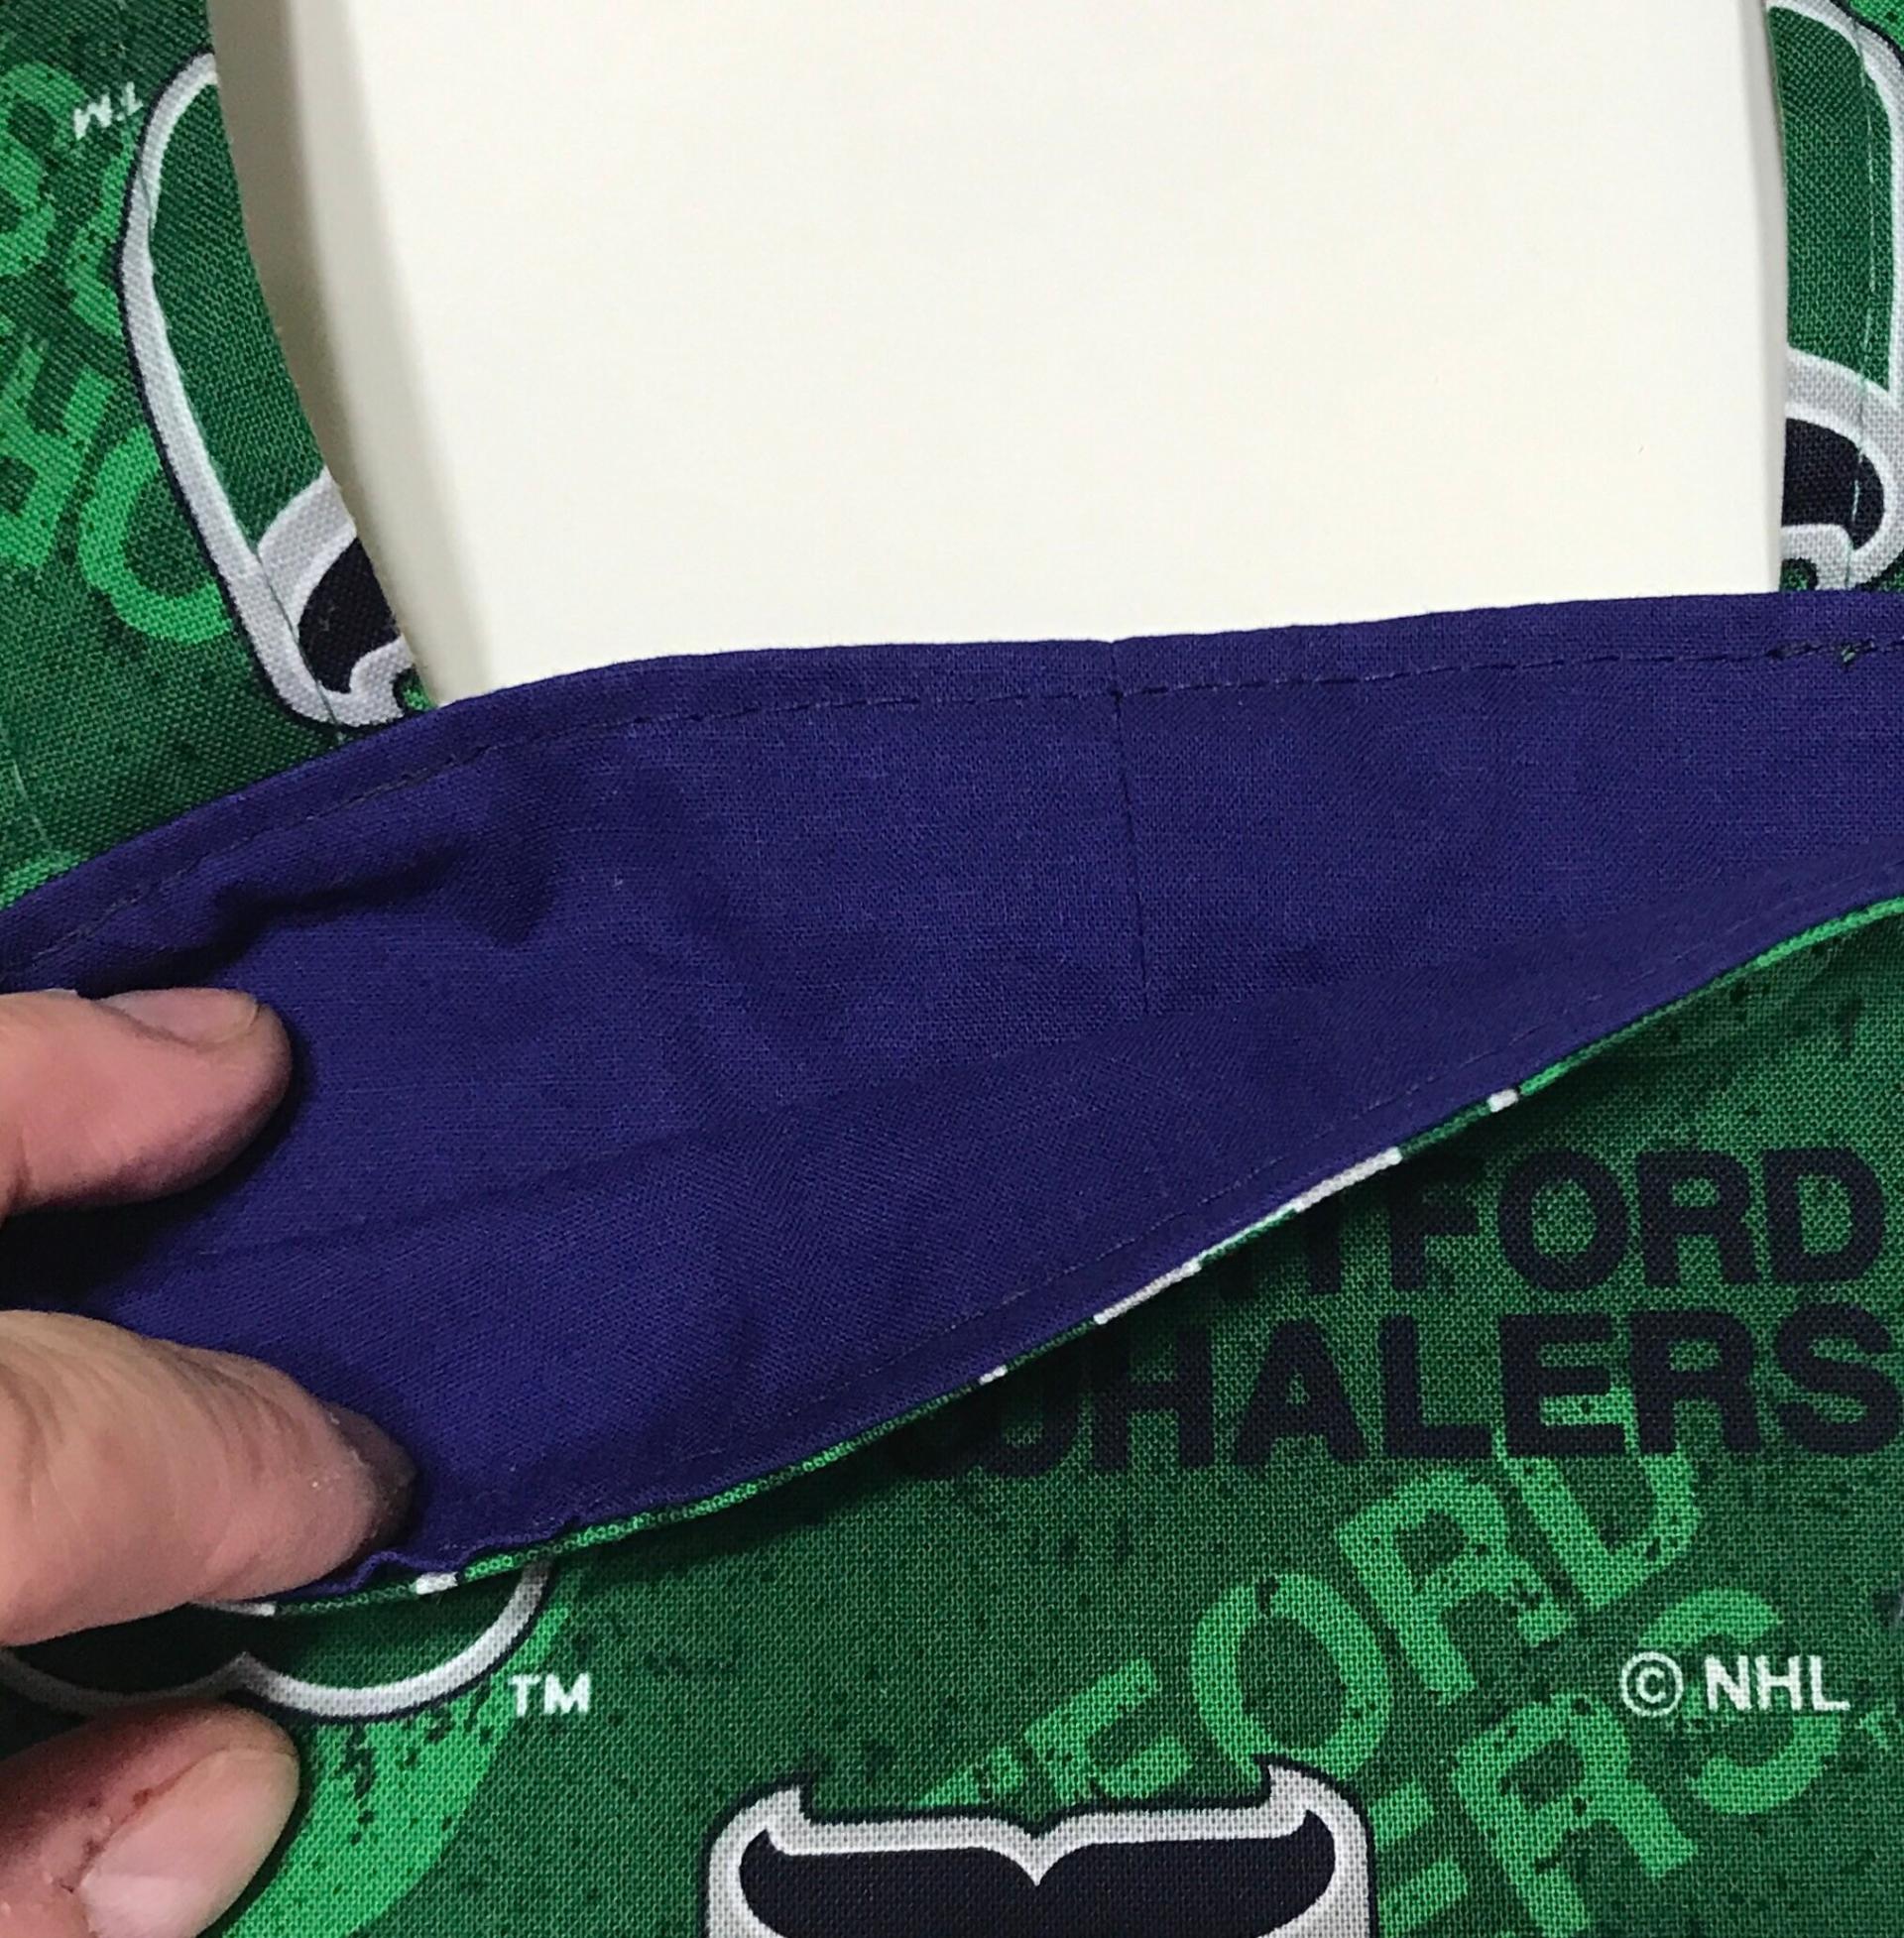 Small, simple basic crutch bag, walker bag, scooter handlebars bag, caddy, handmade from Hartford Whalers licensed fabric